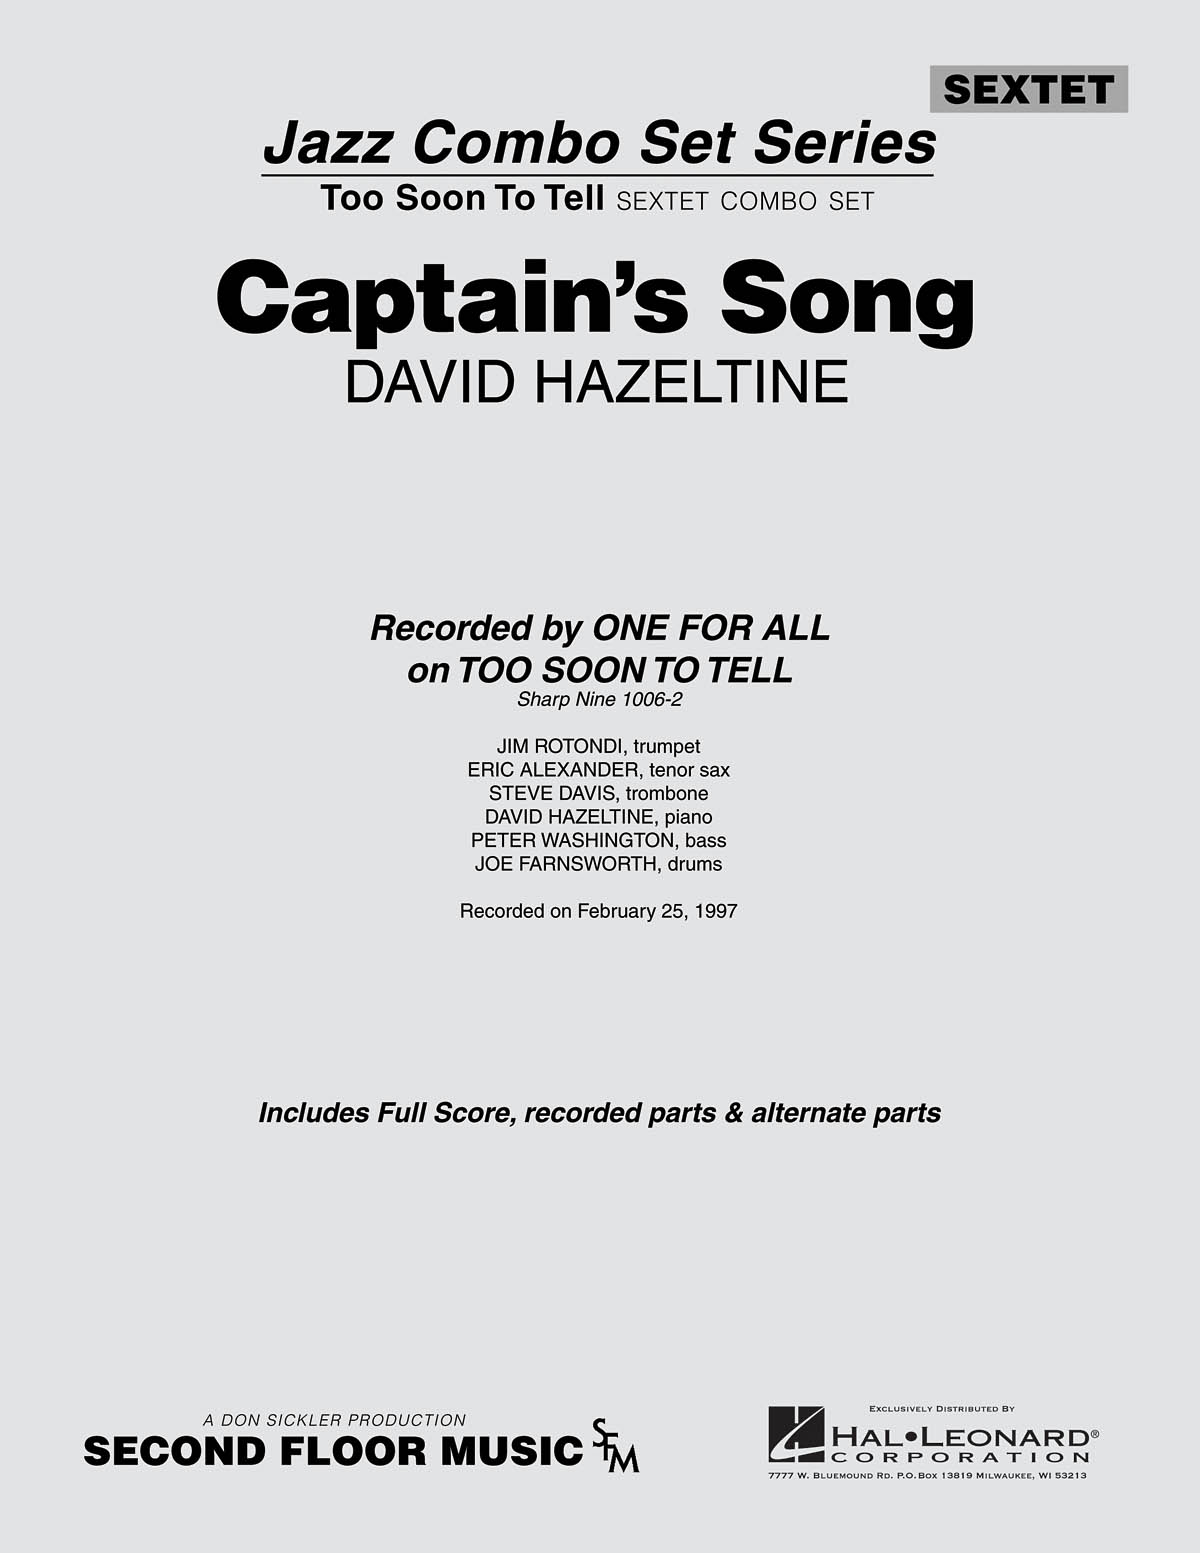 Captain's Song(from the ALL fuer ONE Sextet Combo Series)